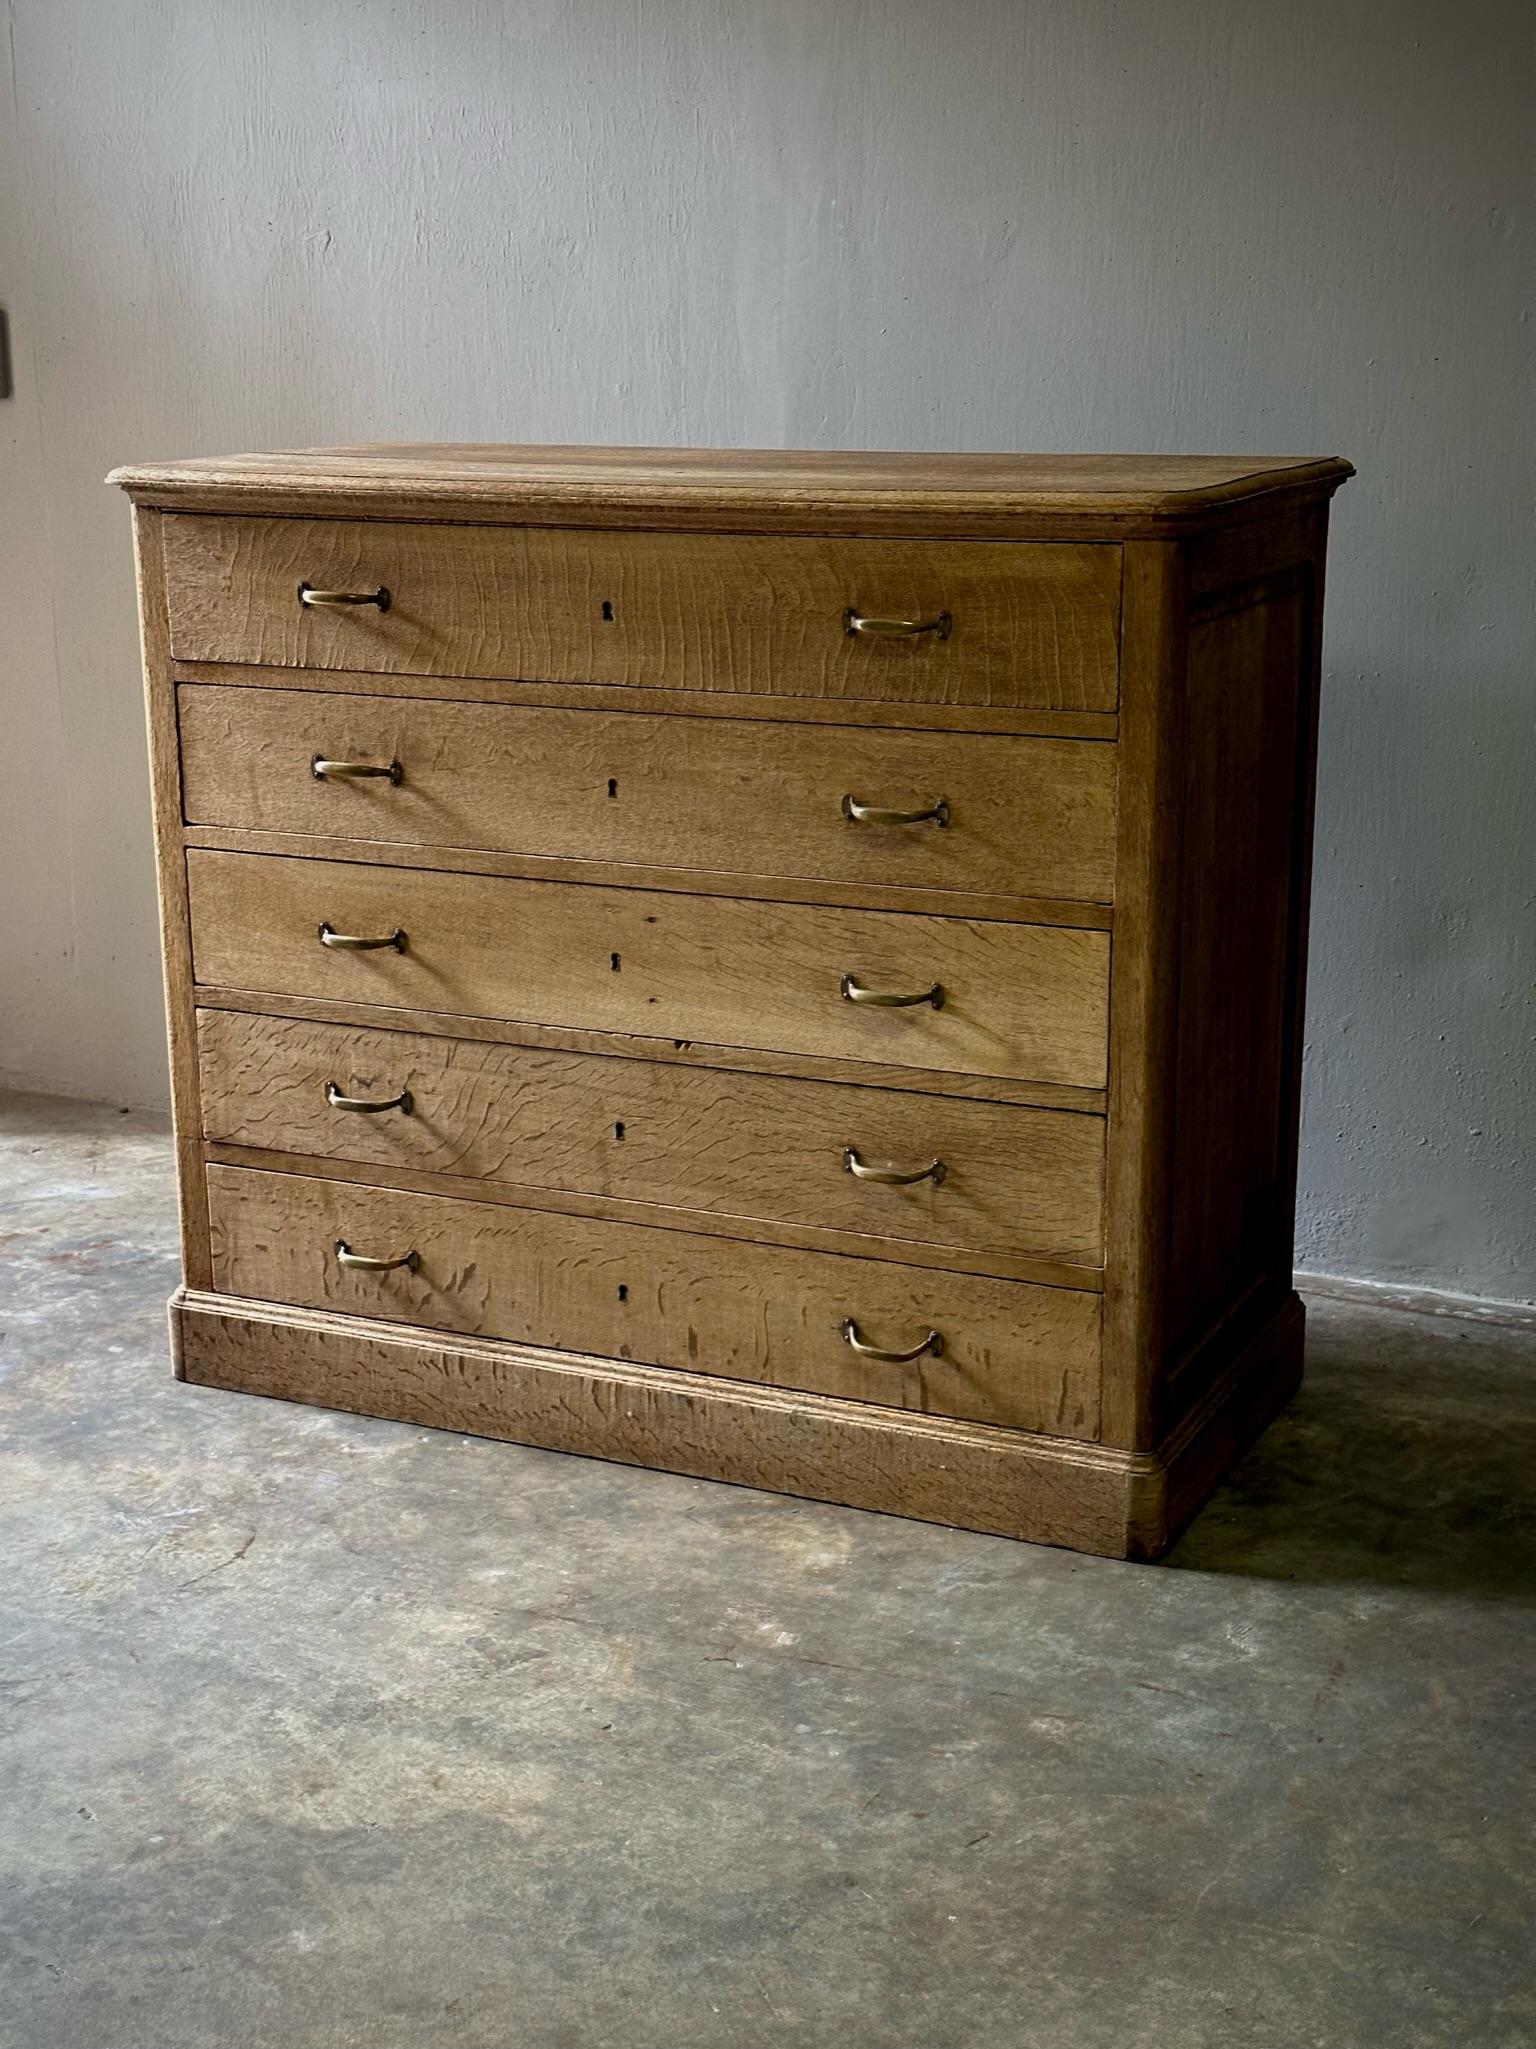 Slightly rustic French chest of drawers in sun bleached oak. Brass finish hardware and keyhole details tastefully and minimally embellish this set of five functional drawers. 

France, circa 1920

Dimensions: 49W x 22D x 42H